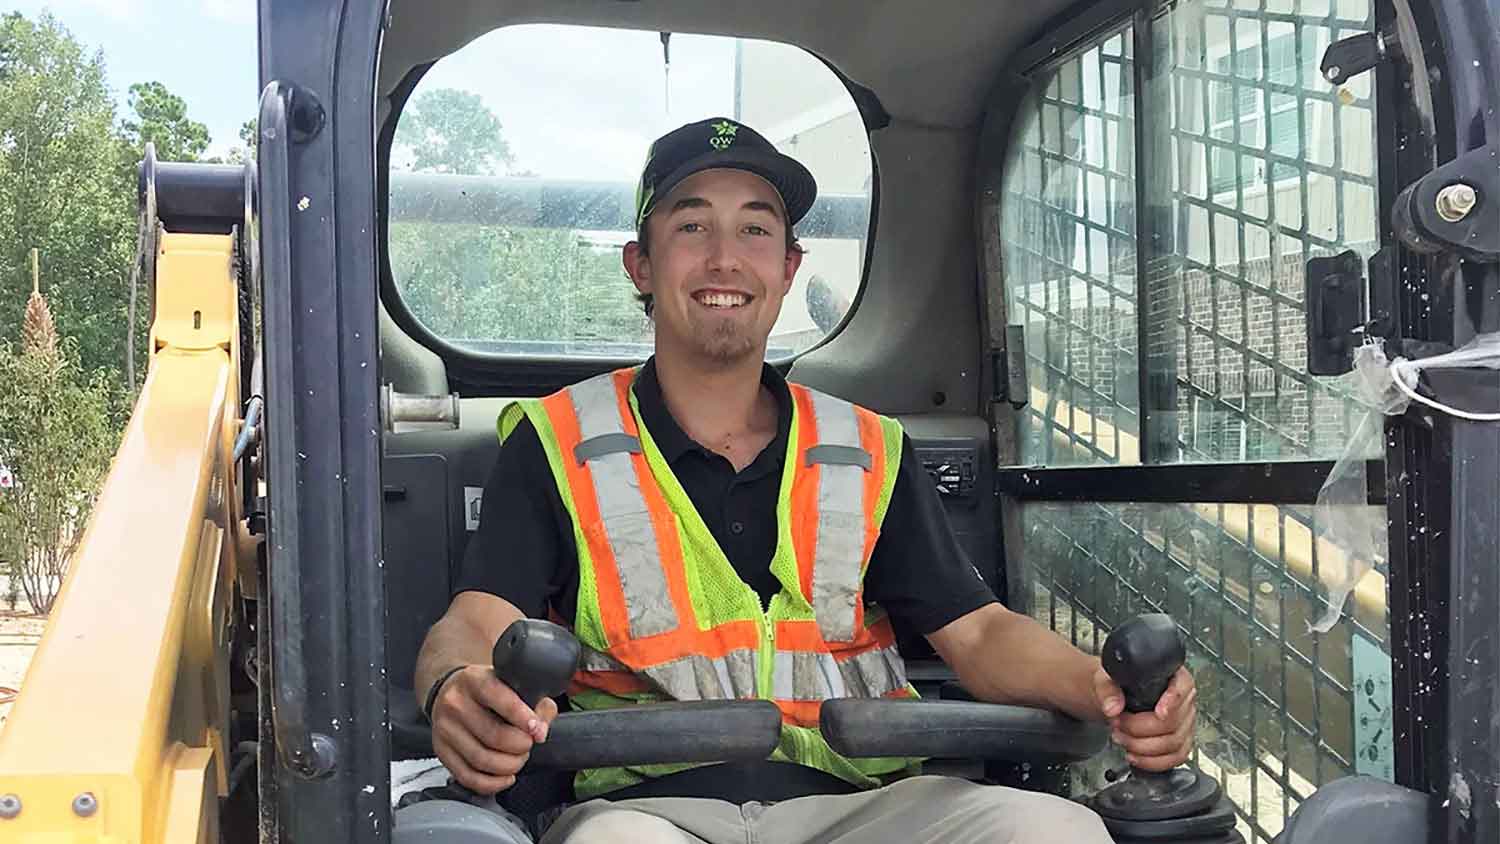 a man in a tractor with construction gear